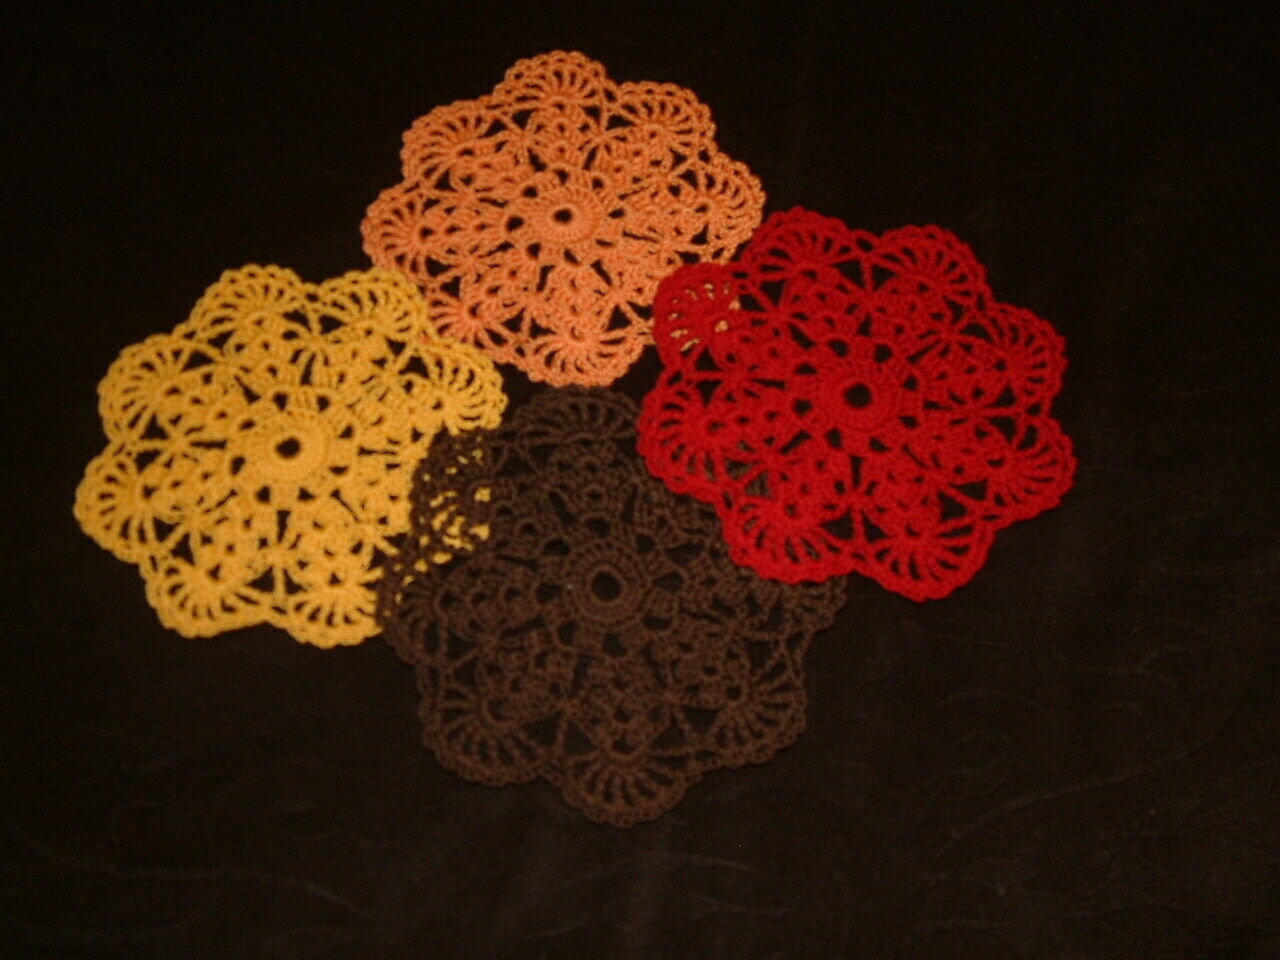 New Hand Crocheted Doily - Red Orange Goldenrod Fudge Brown Set Of 4 Fall Autumn